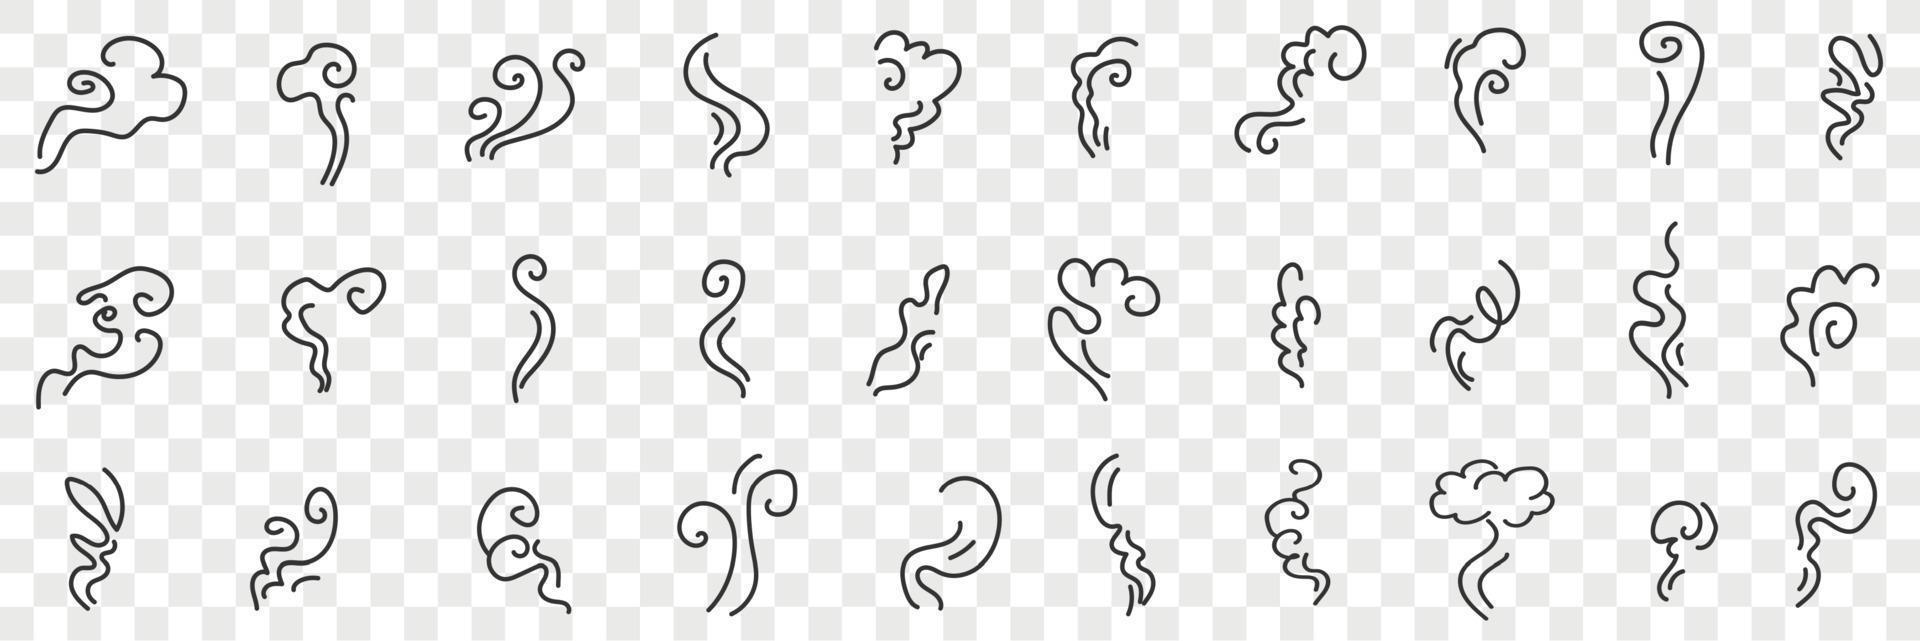 Wind and curves doodle set. Collection of hand drawn various abstract shapes of curves of wind of air flow isolated on transparent background vector